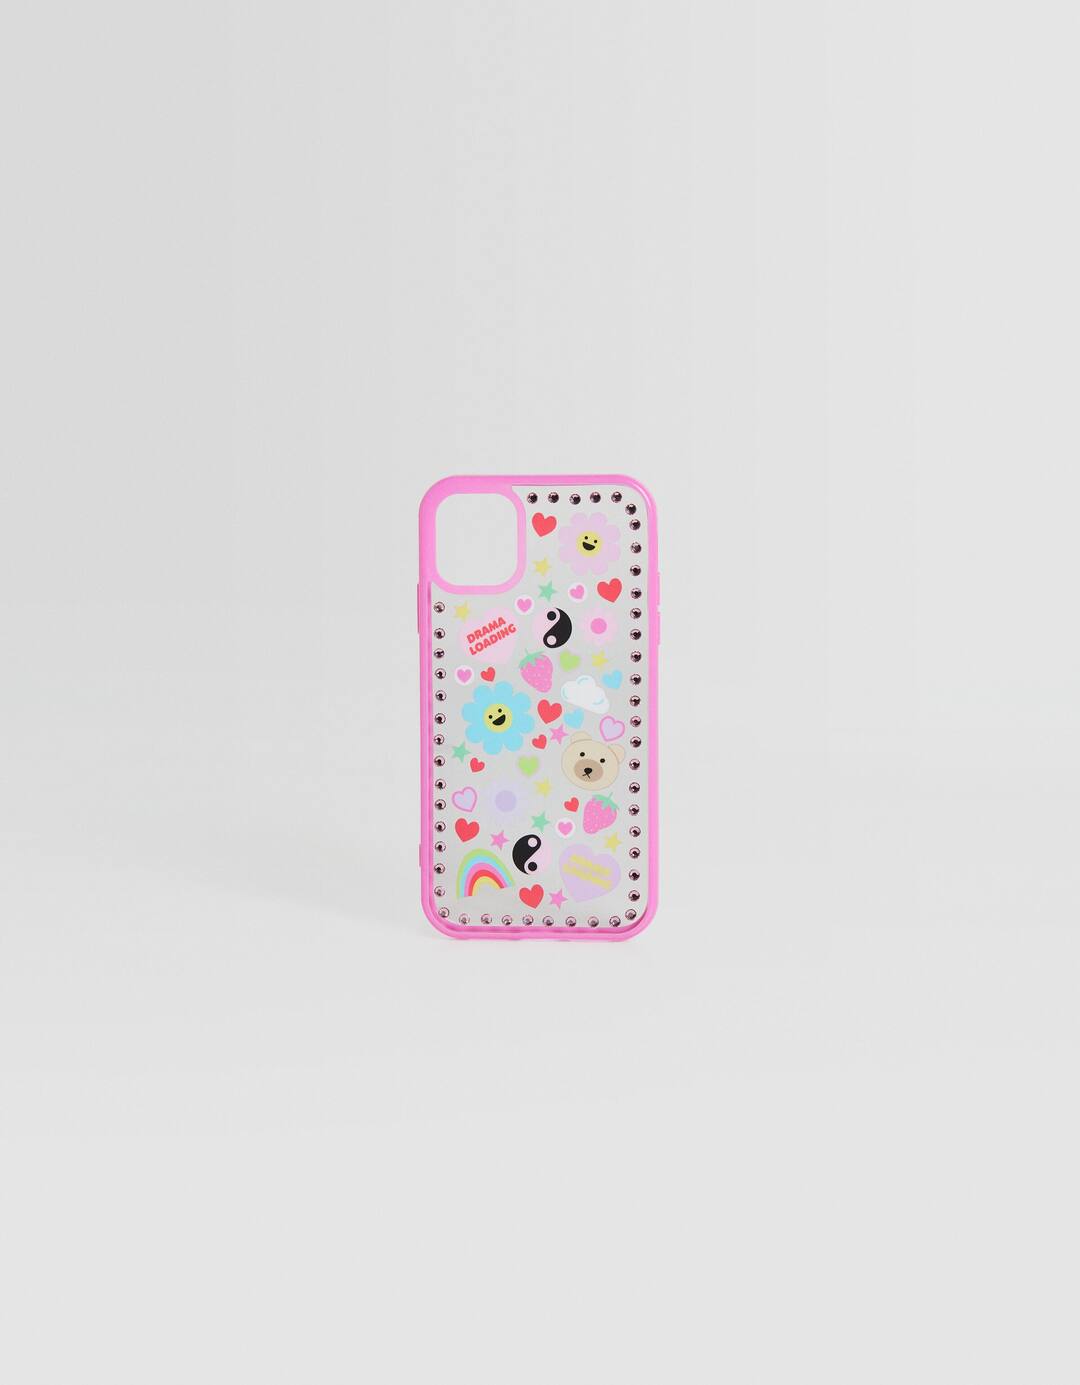 Coque mobile iPhone autocollants strass